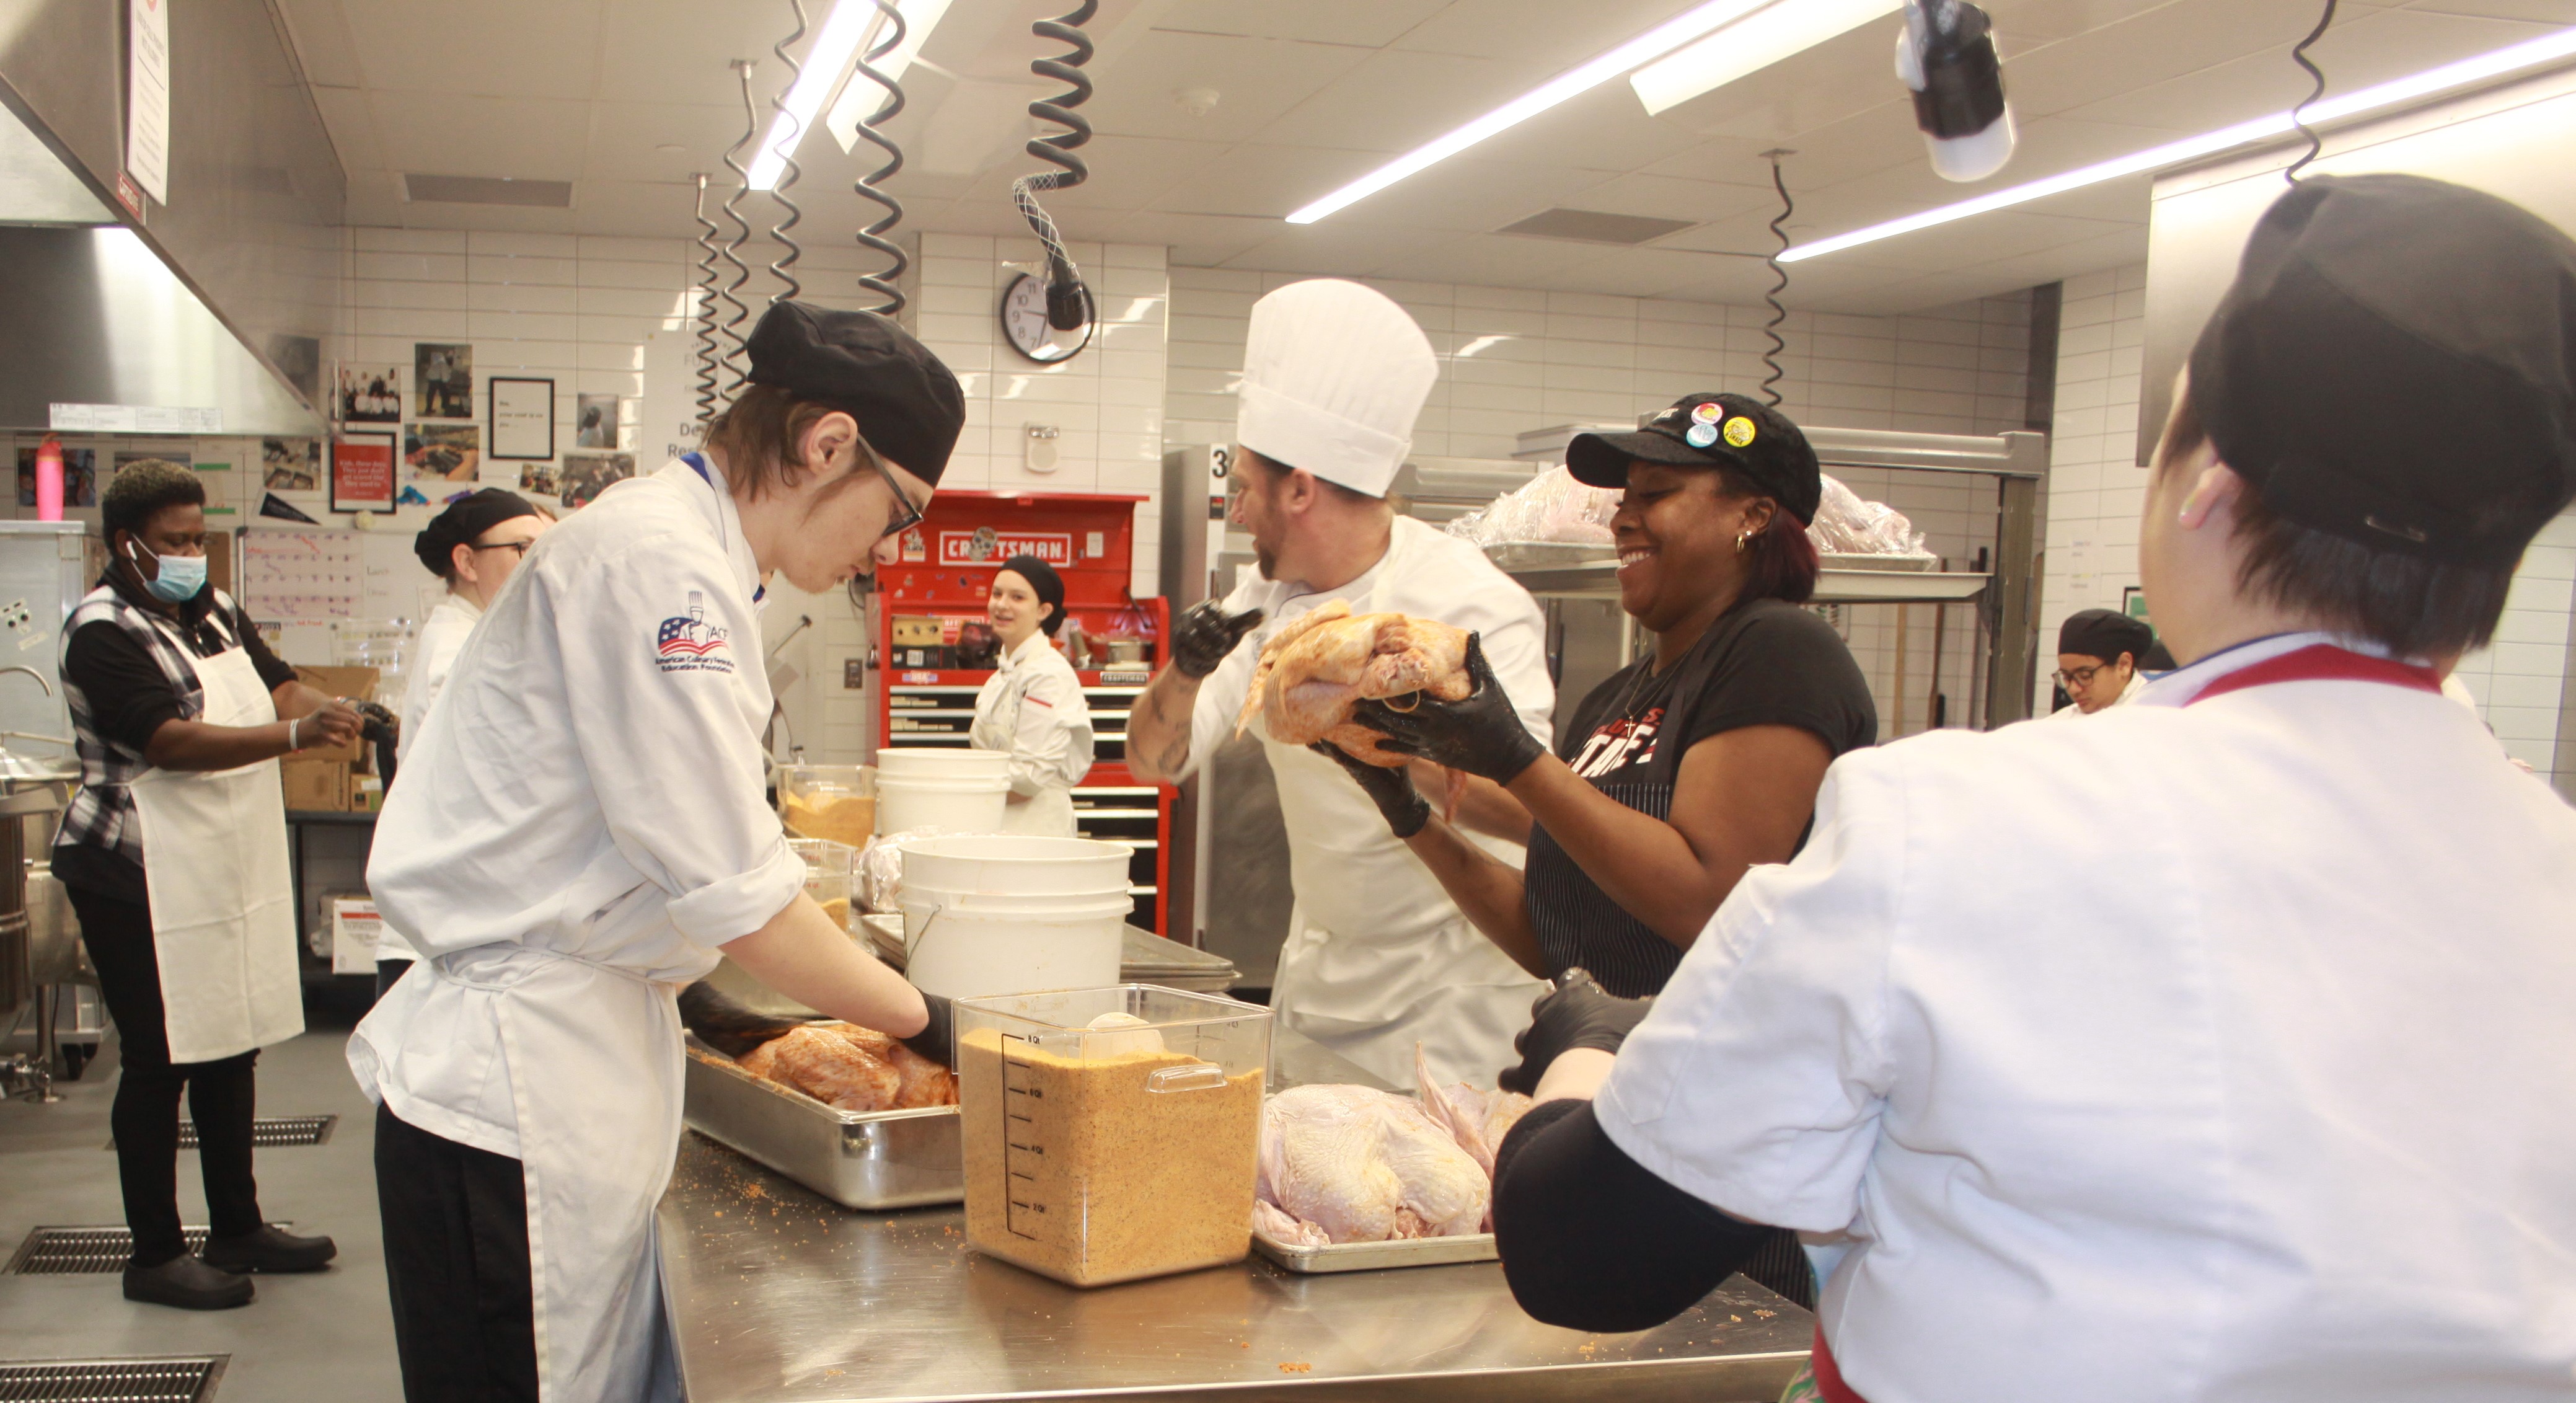 Staff and students from the School of Hospitality Management and Culinary Arts pitched in on Nov. 21, preparing 610 turkeys to raise funds for a local cancer research institute.